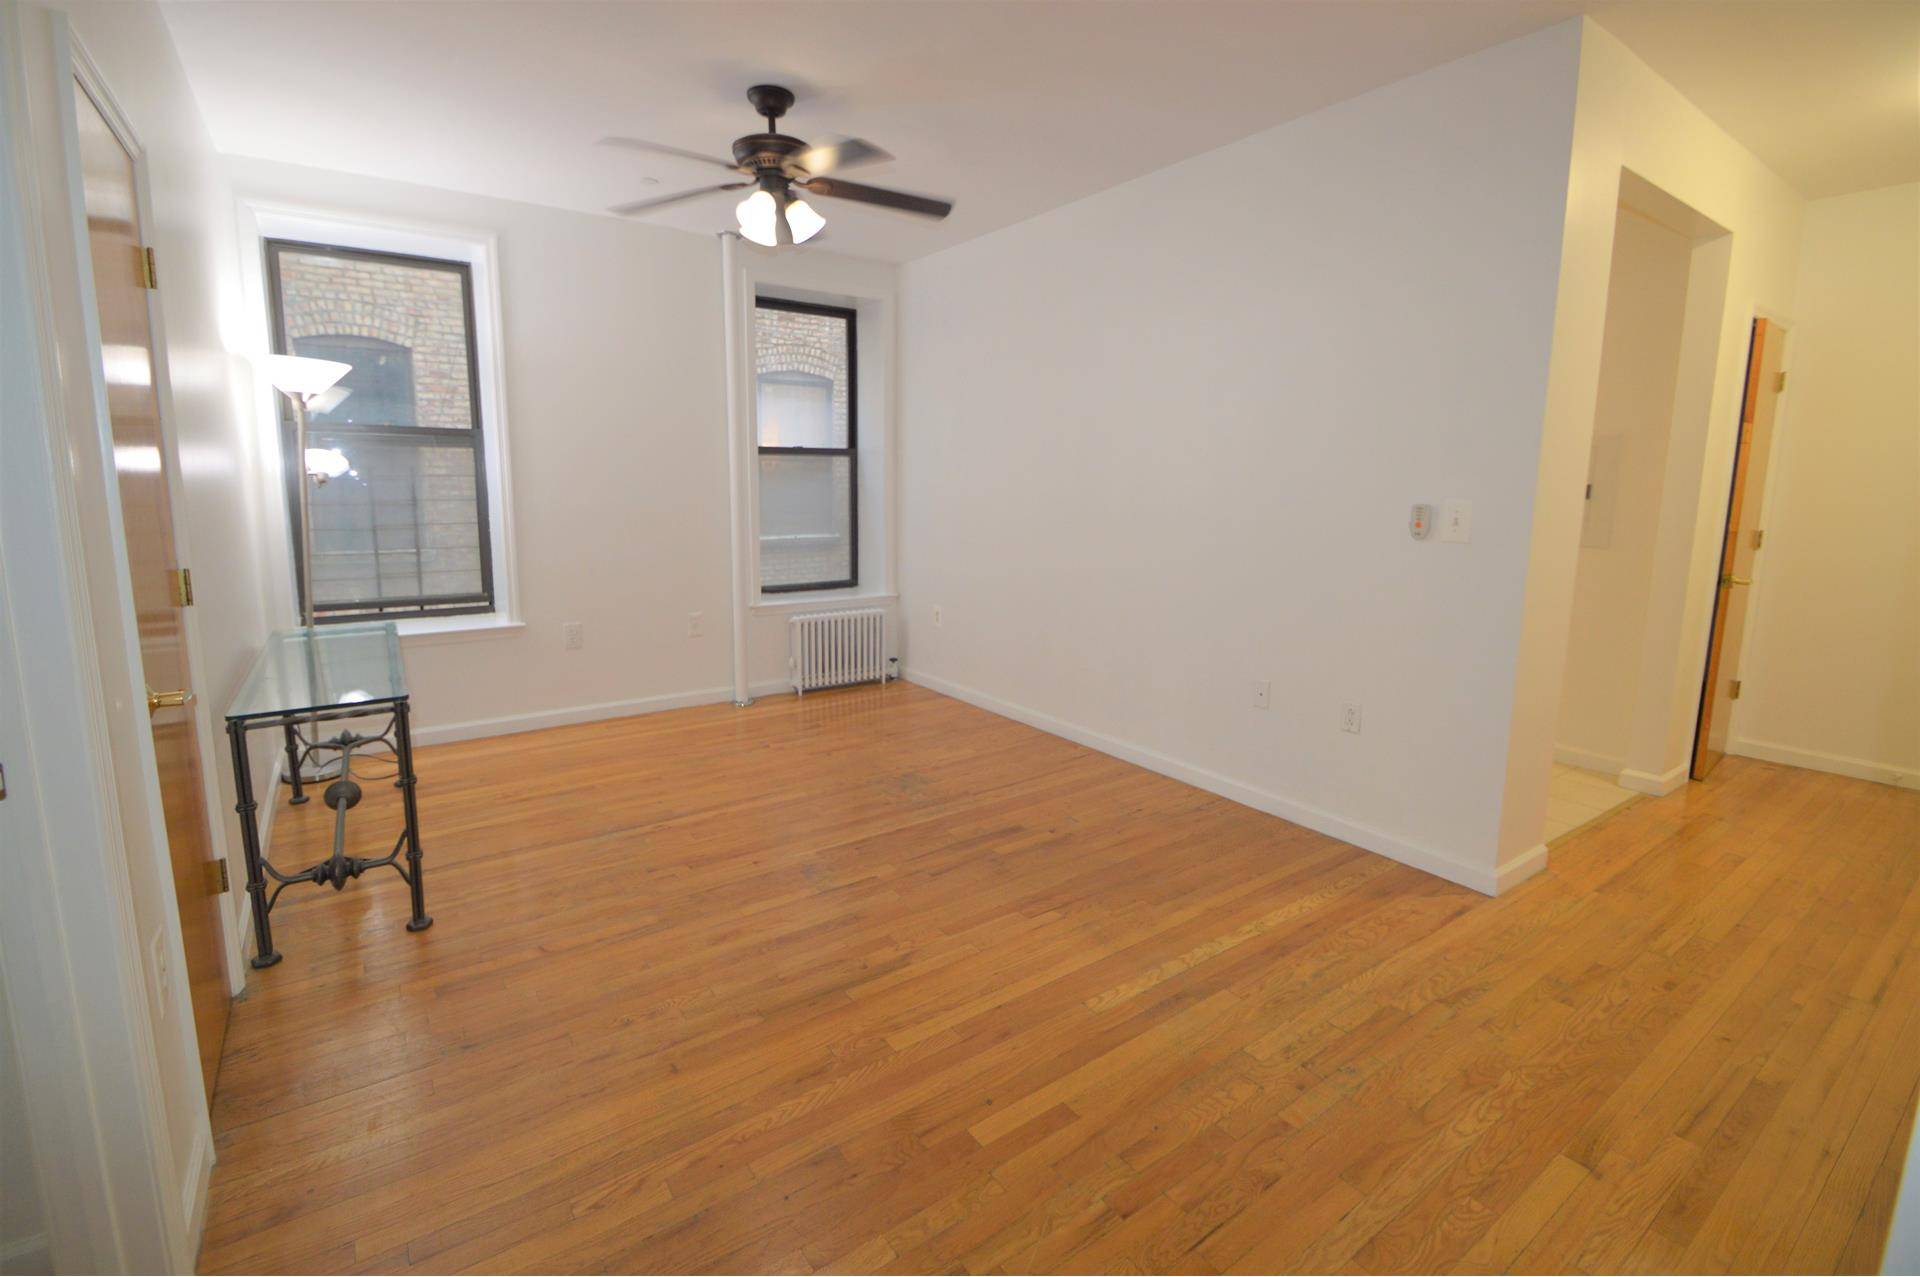 This spacious two bedroom one bathroom apartment is located in the residential Washington Heights neighborhood.